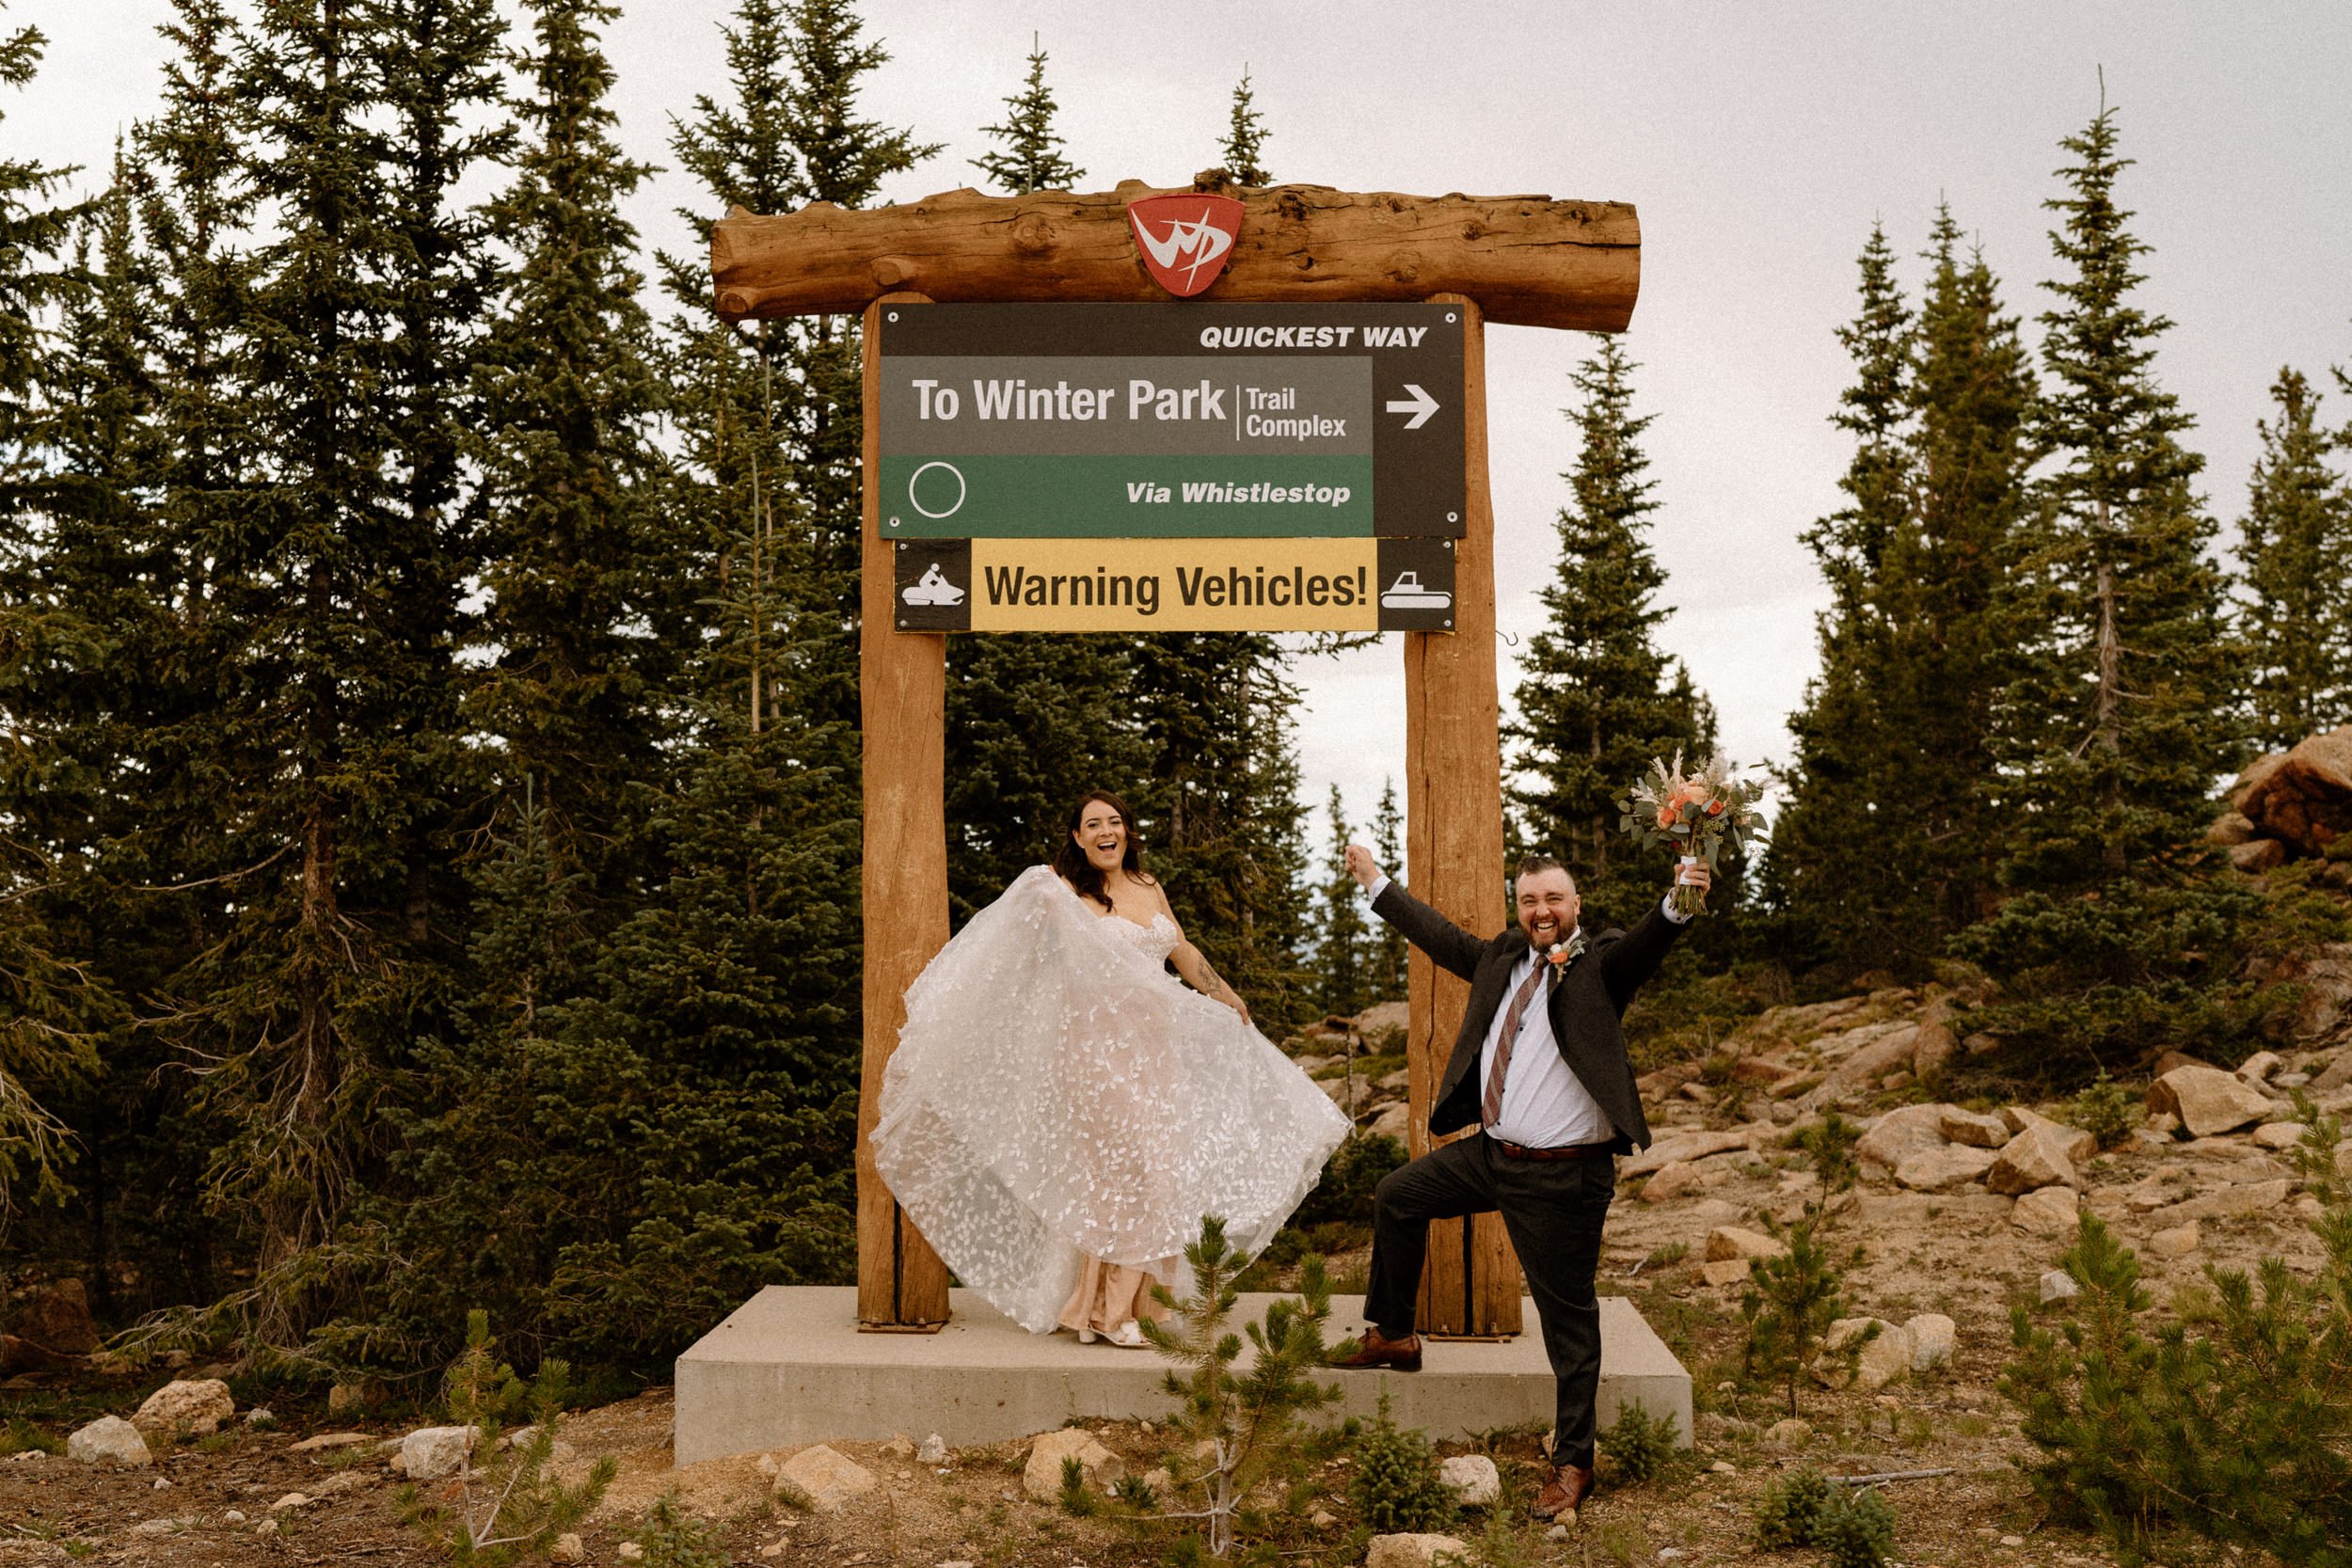 Bride and groom pose in front of Winter Park sign